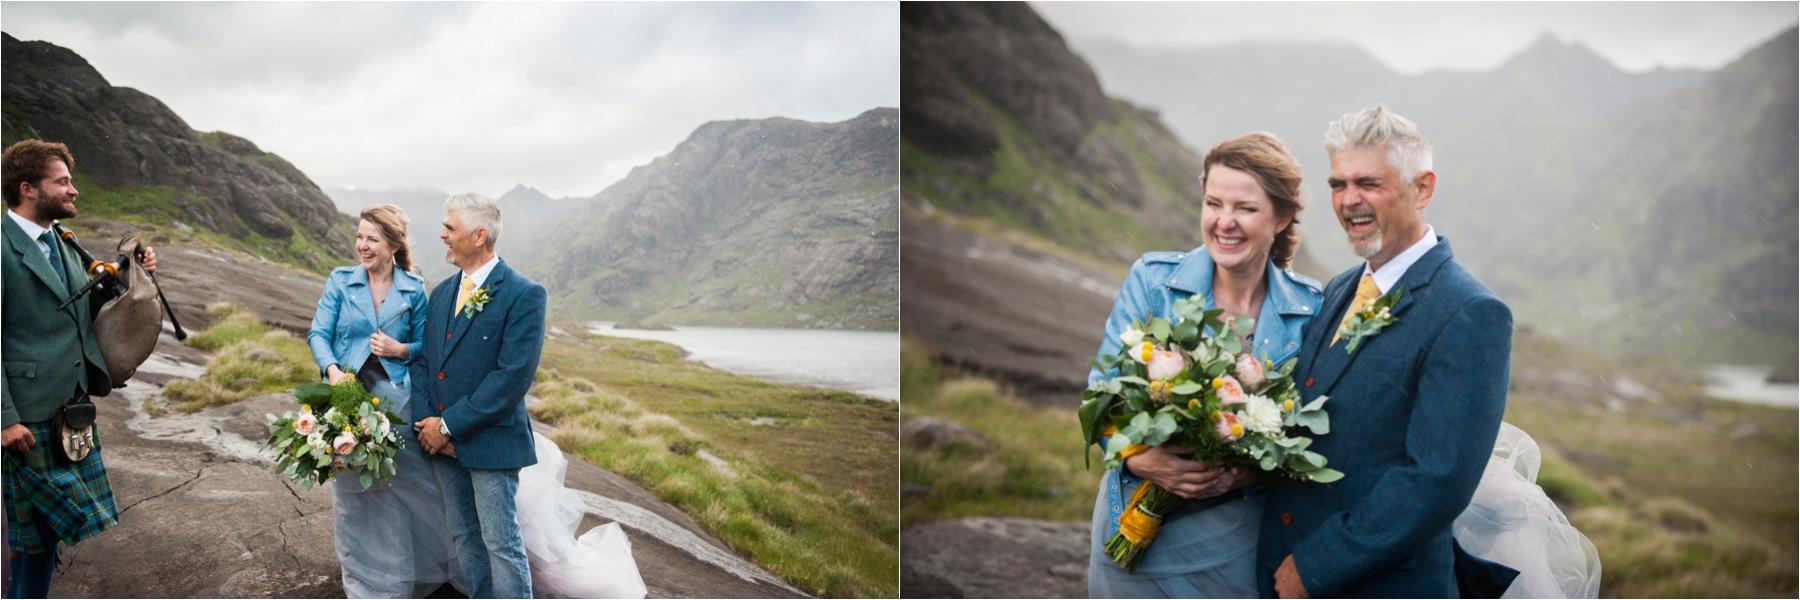 The heavens open during a wedding ceremony at Loch Coruisk on the Isle of Skye. 